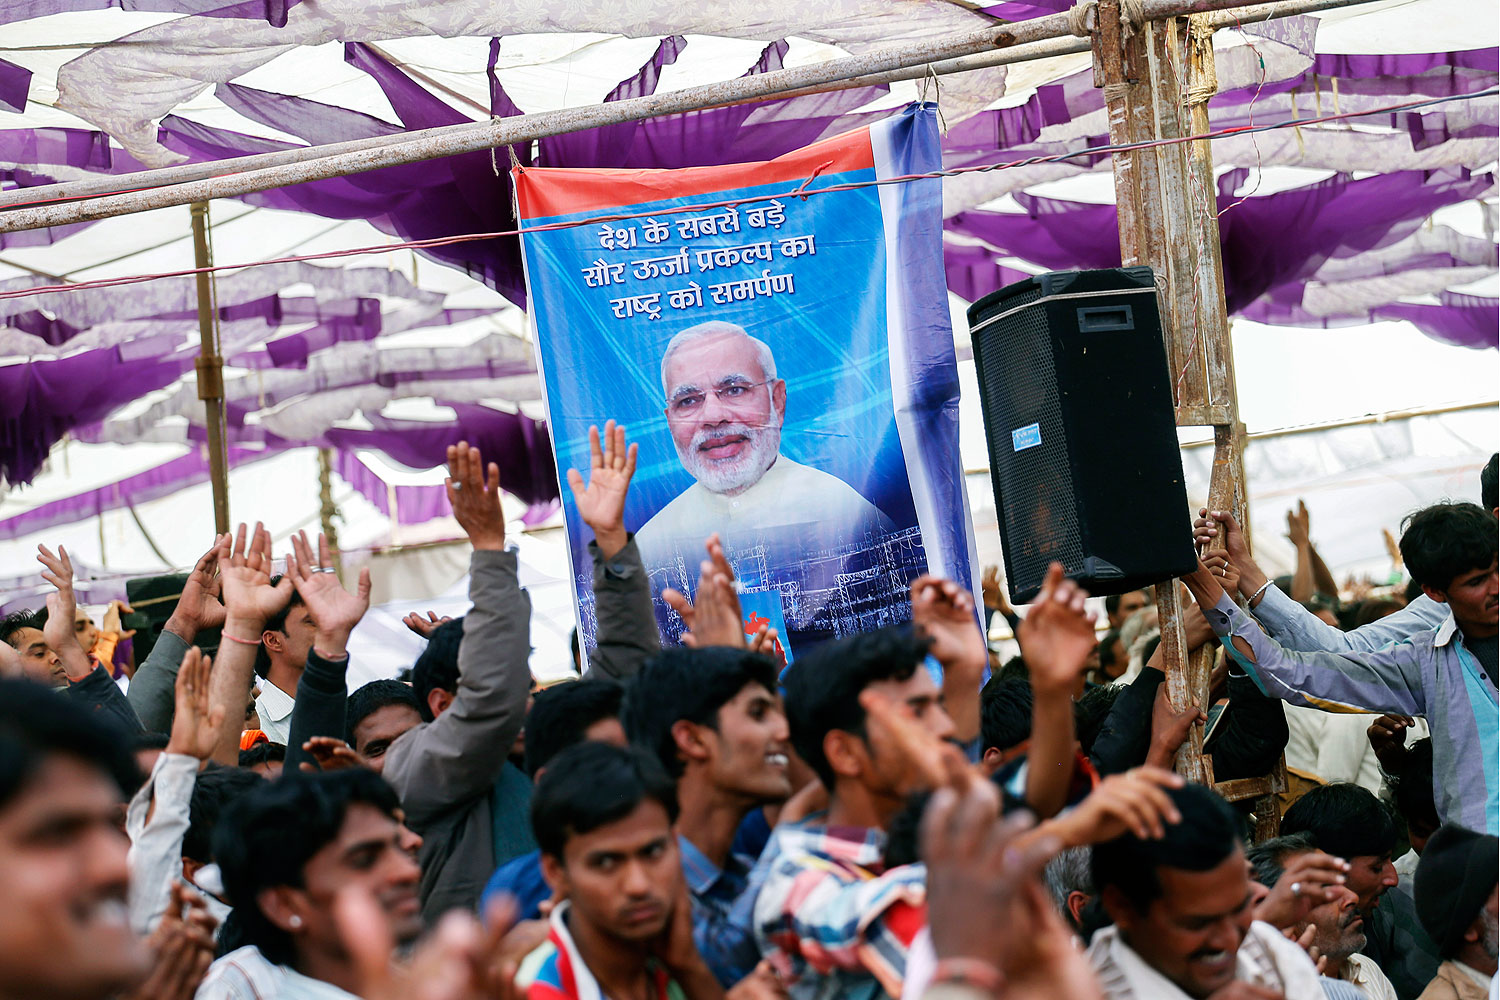 Supporters cheer beneath a poster featuring Narendra Modi at a rally near Bhagwanpura, Madhya Pradesh, India, on Feb. 26, 2014 (Bloomberg / Getty Images)